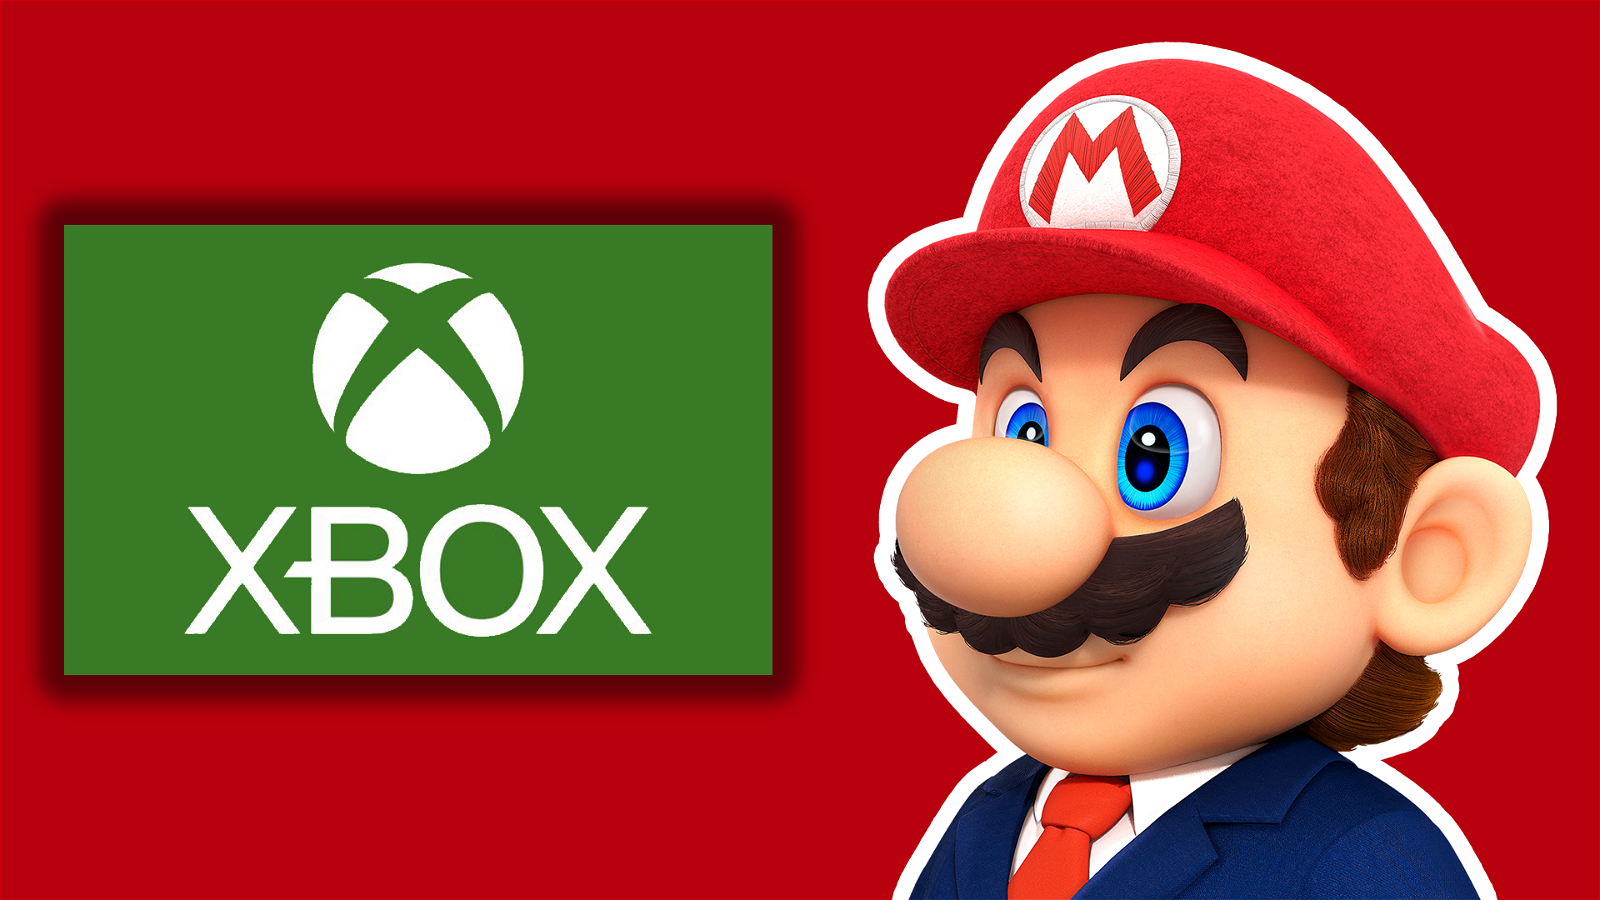 Could Mario games ever make their way to Xbox consoles?